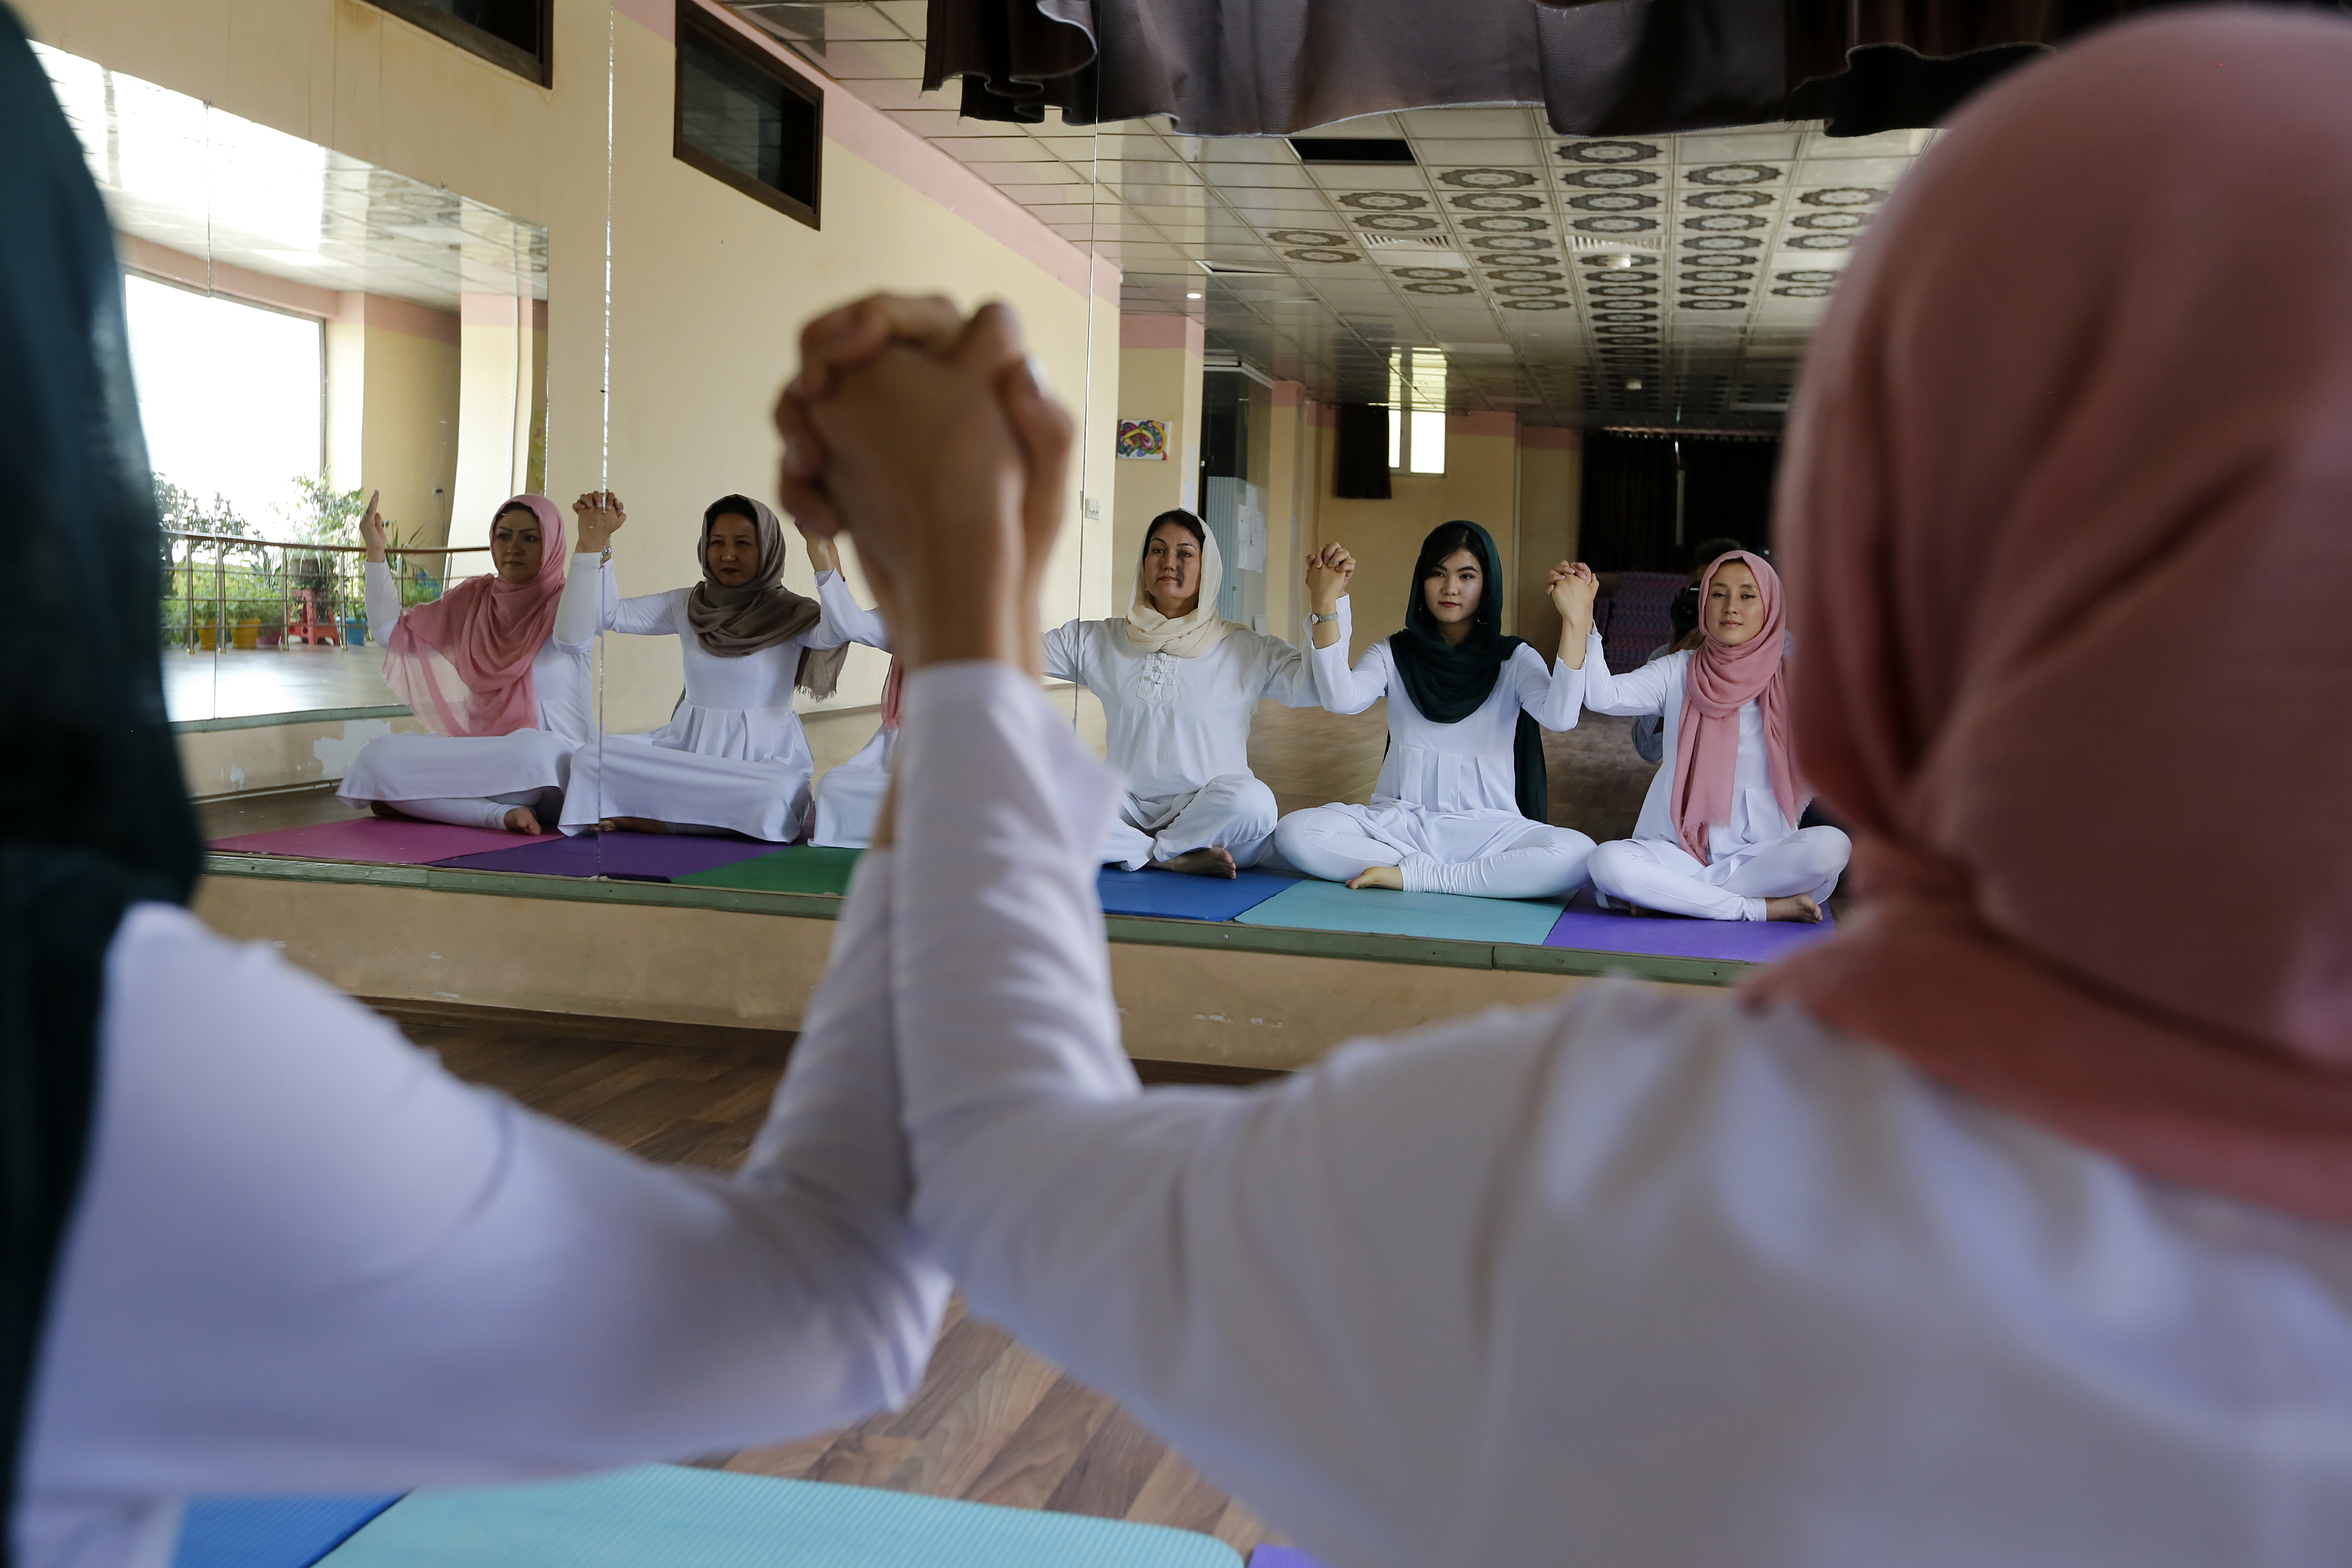 Yoga class at Kabul's first Yoga studio. Opened in 2017, the center helps women build mental and physical strength. UNAMA Photo/Fardin Waezi